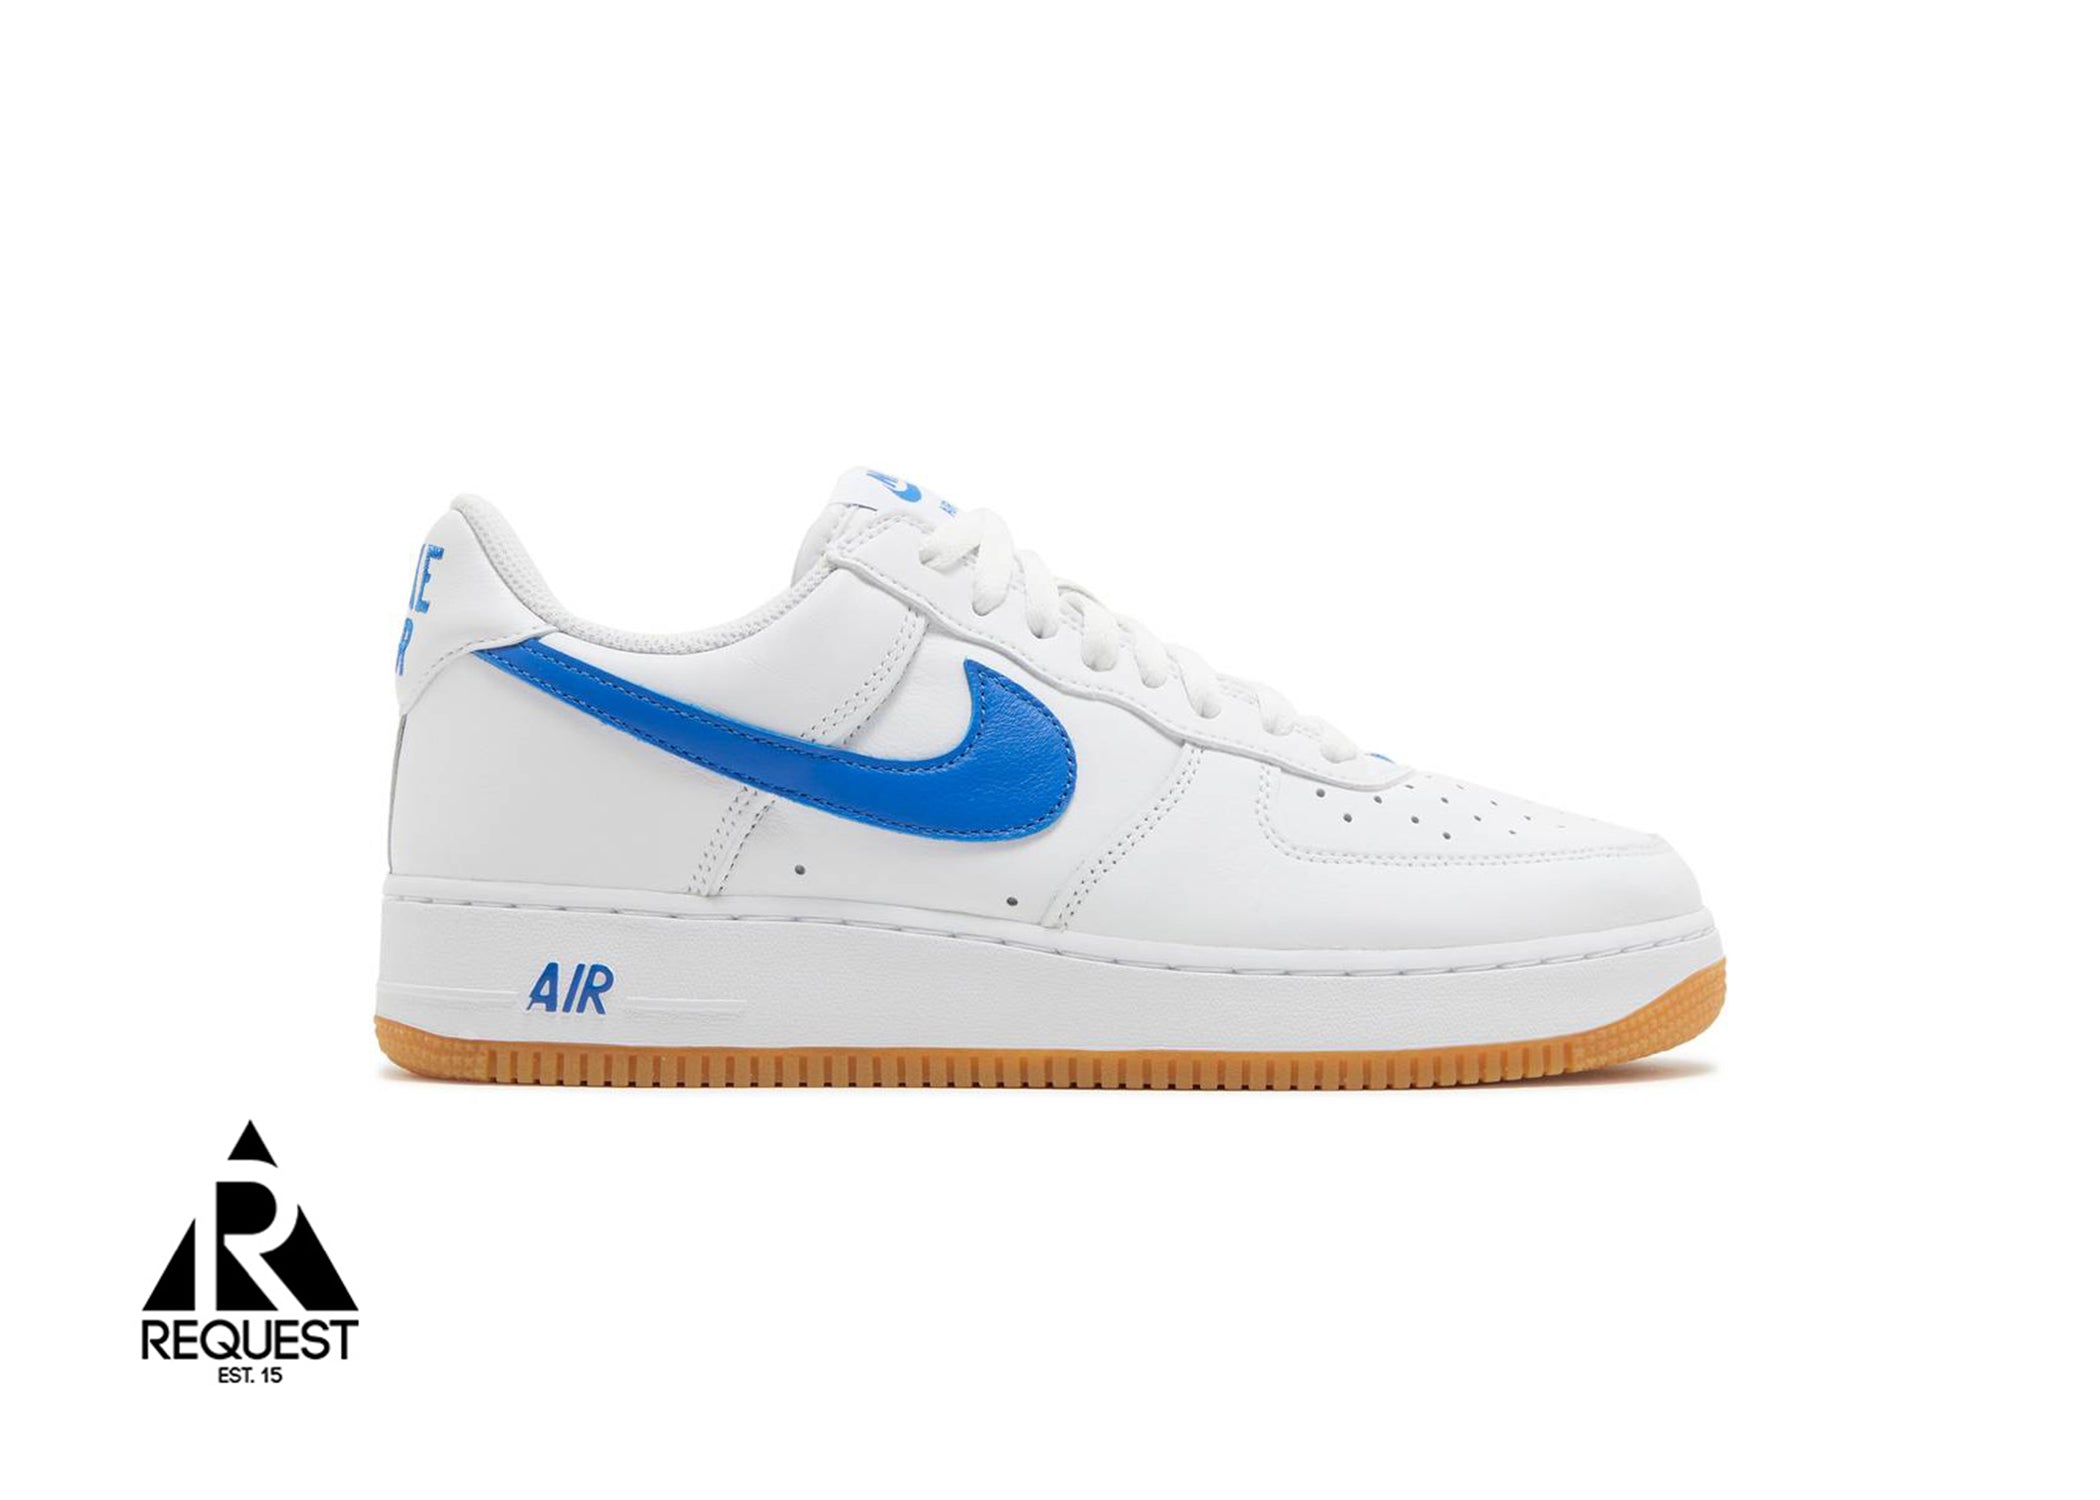 Nike Air Force 1 '07 Low "Color of The Month Varsity Royal Gum"